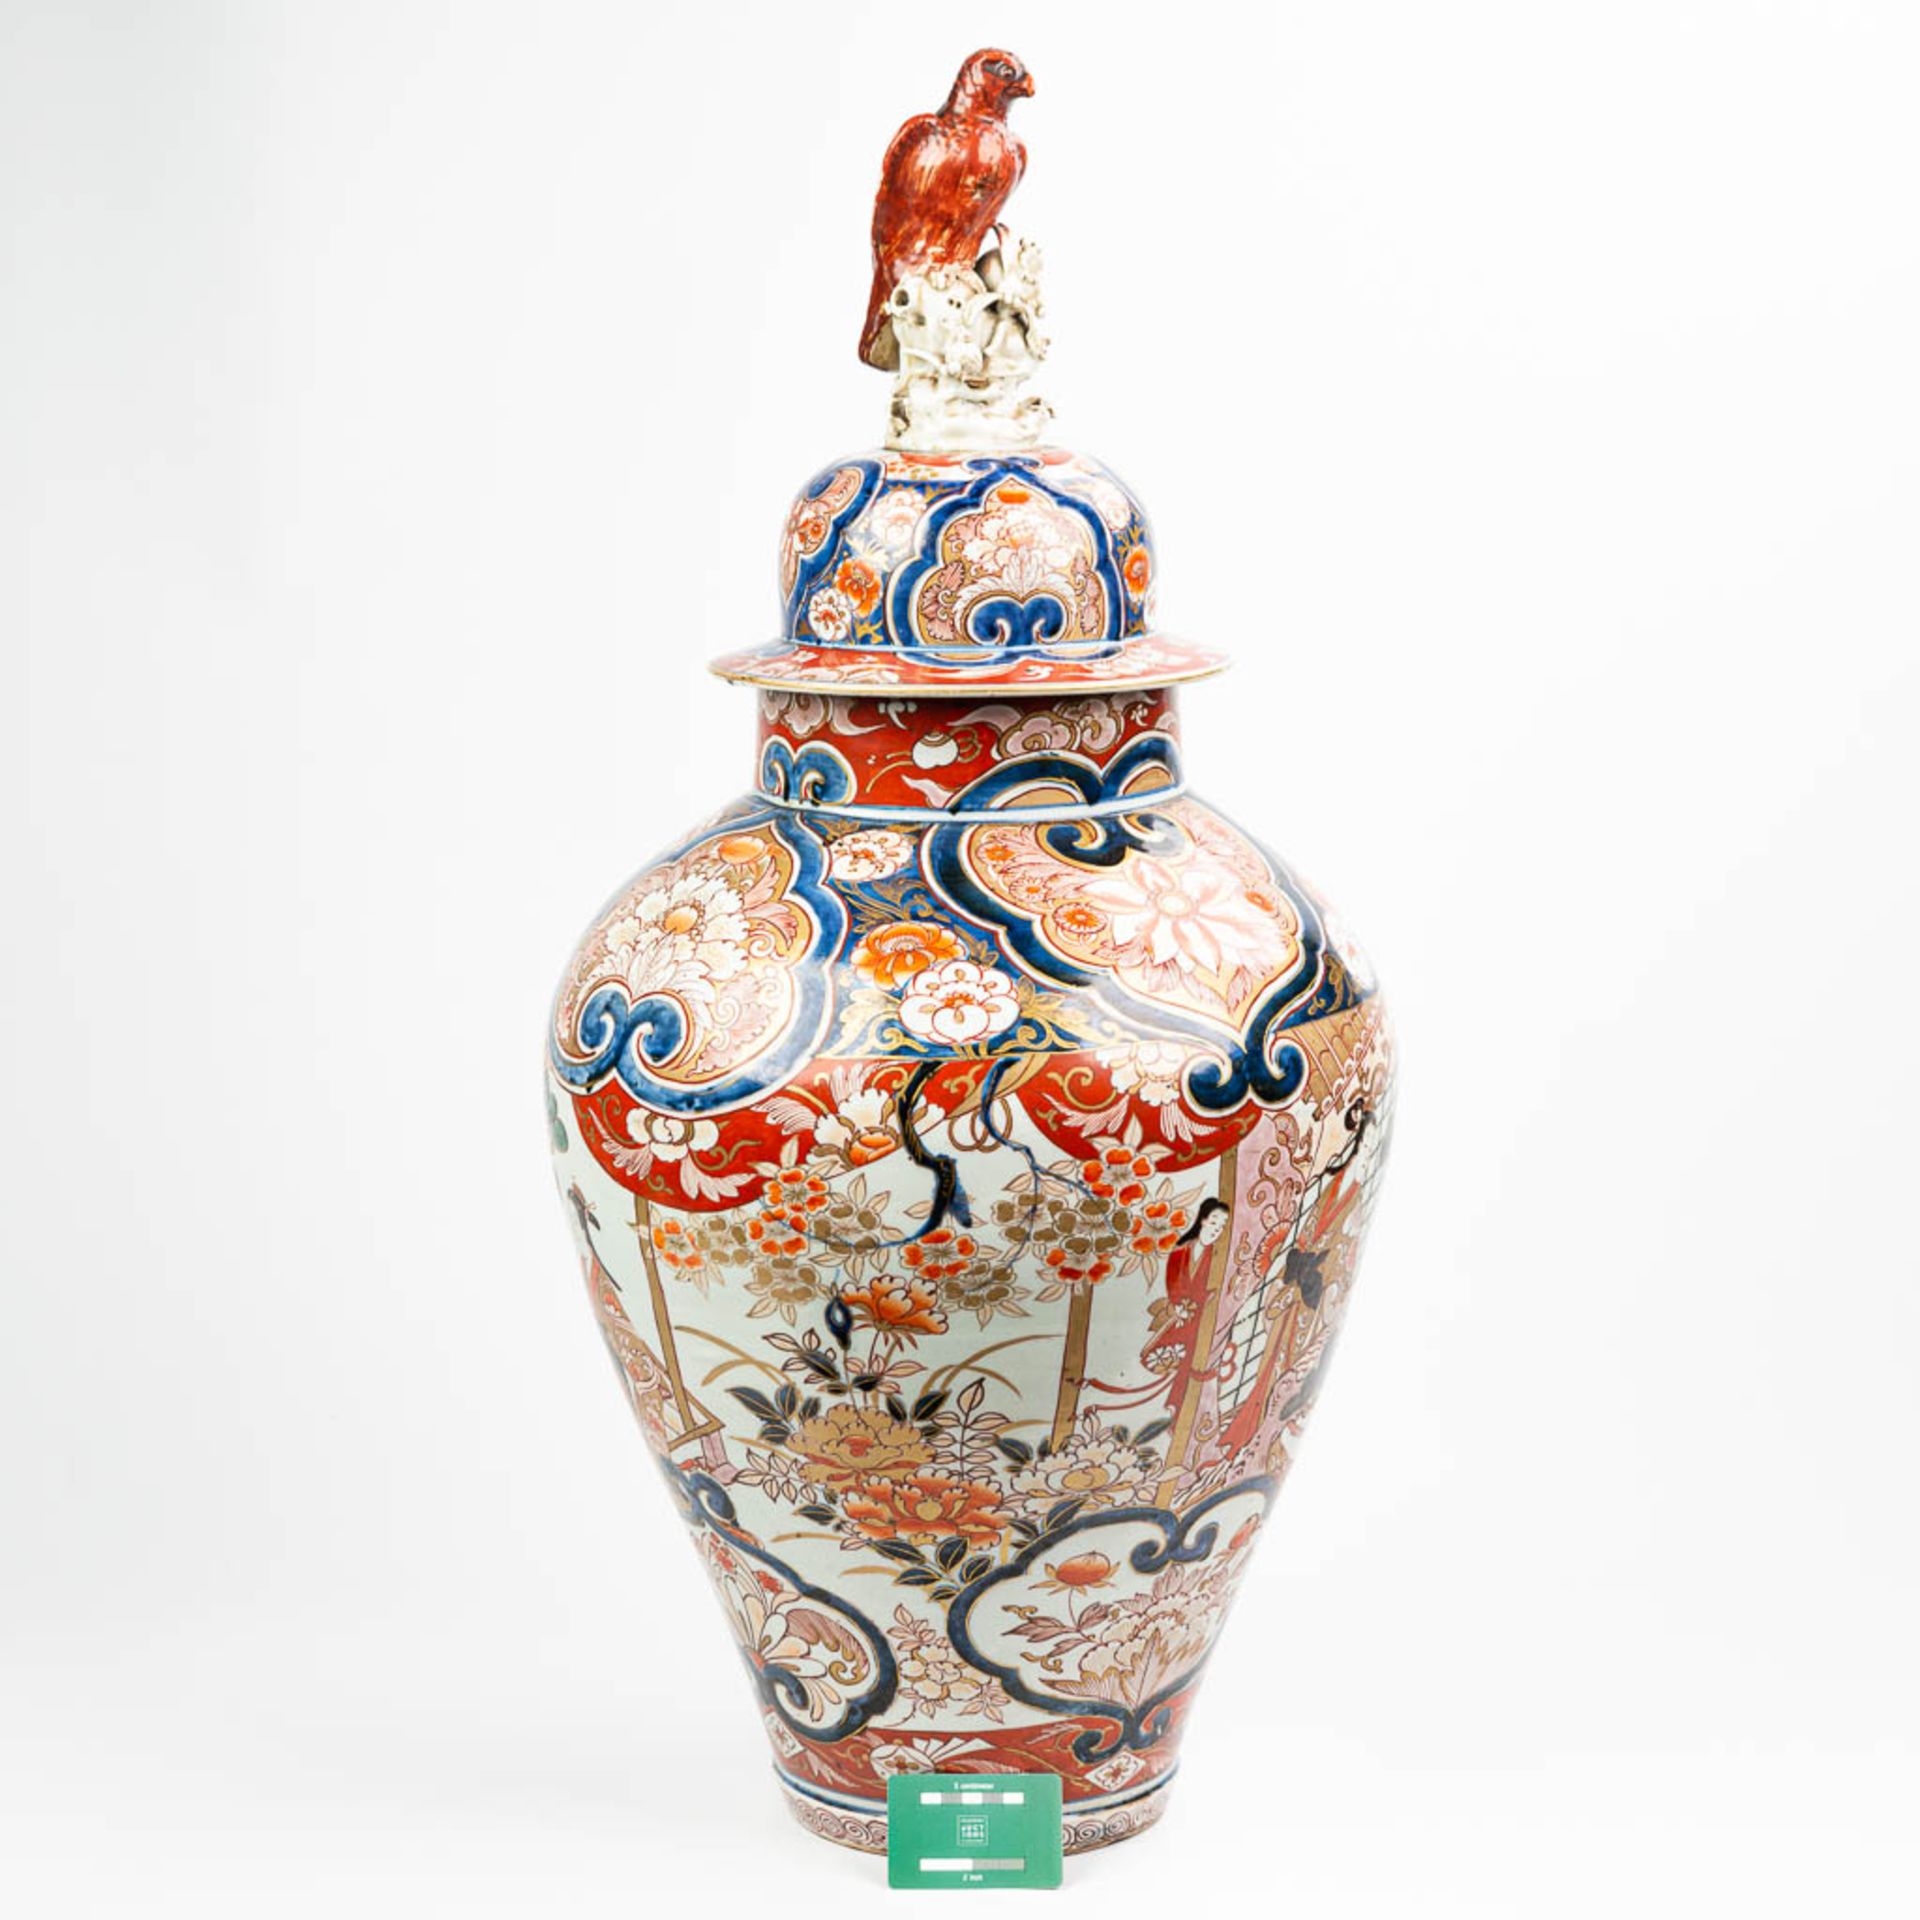 A large vase with lid made of Japanese porcelain in Imari - Image 2 of 16